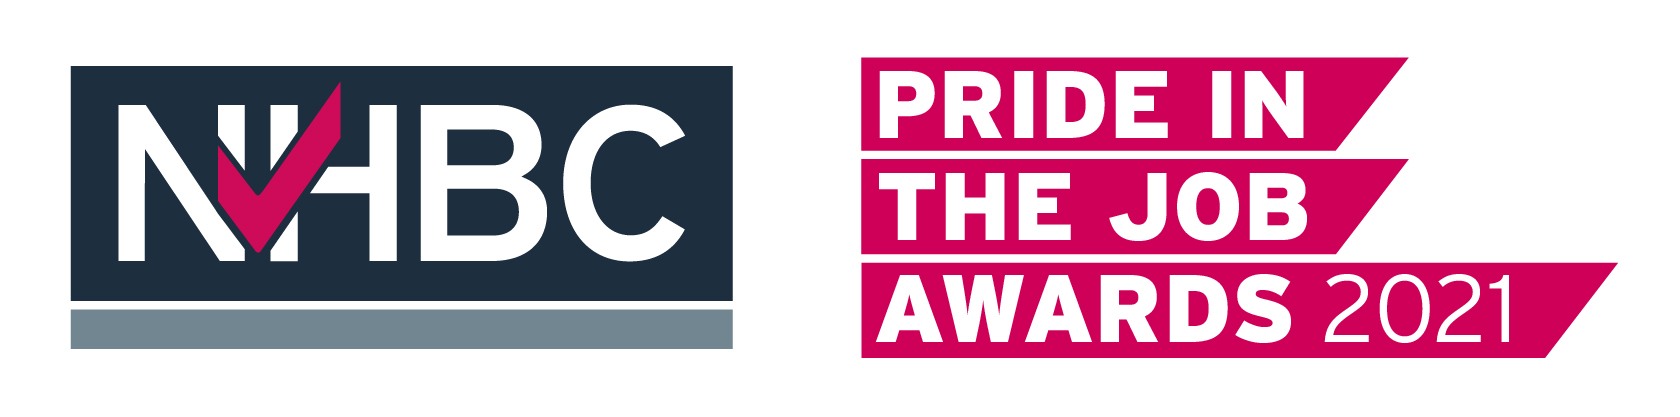 NHBC’s Pride in the Job Awards recognise the UK’s best site managers @NHBC